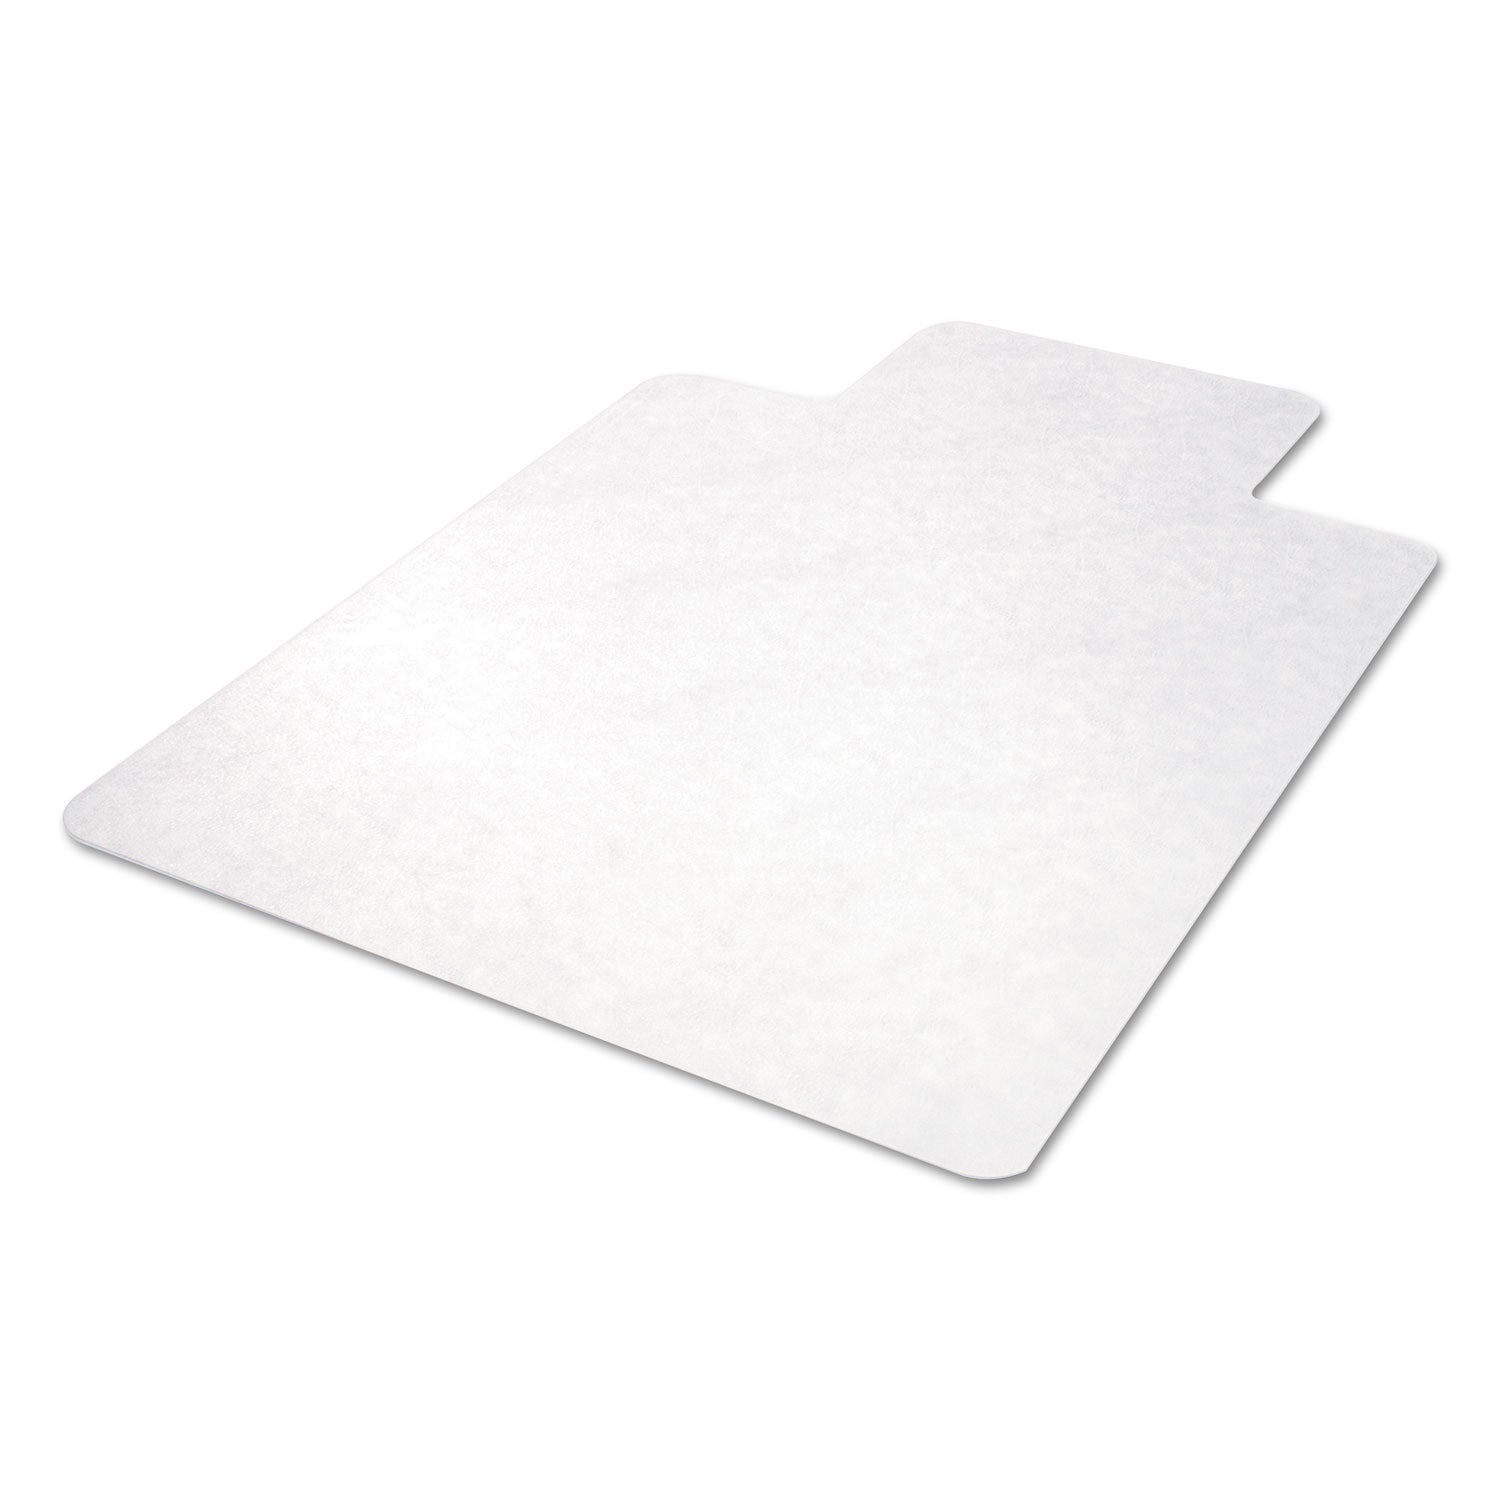 all-day-use-non-studded-chair-mat-for-hard-floors-45-x-53-wide-lipped-clear_alemat4553hfl - 7